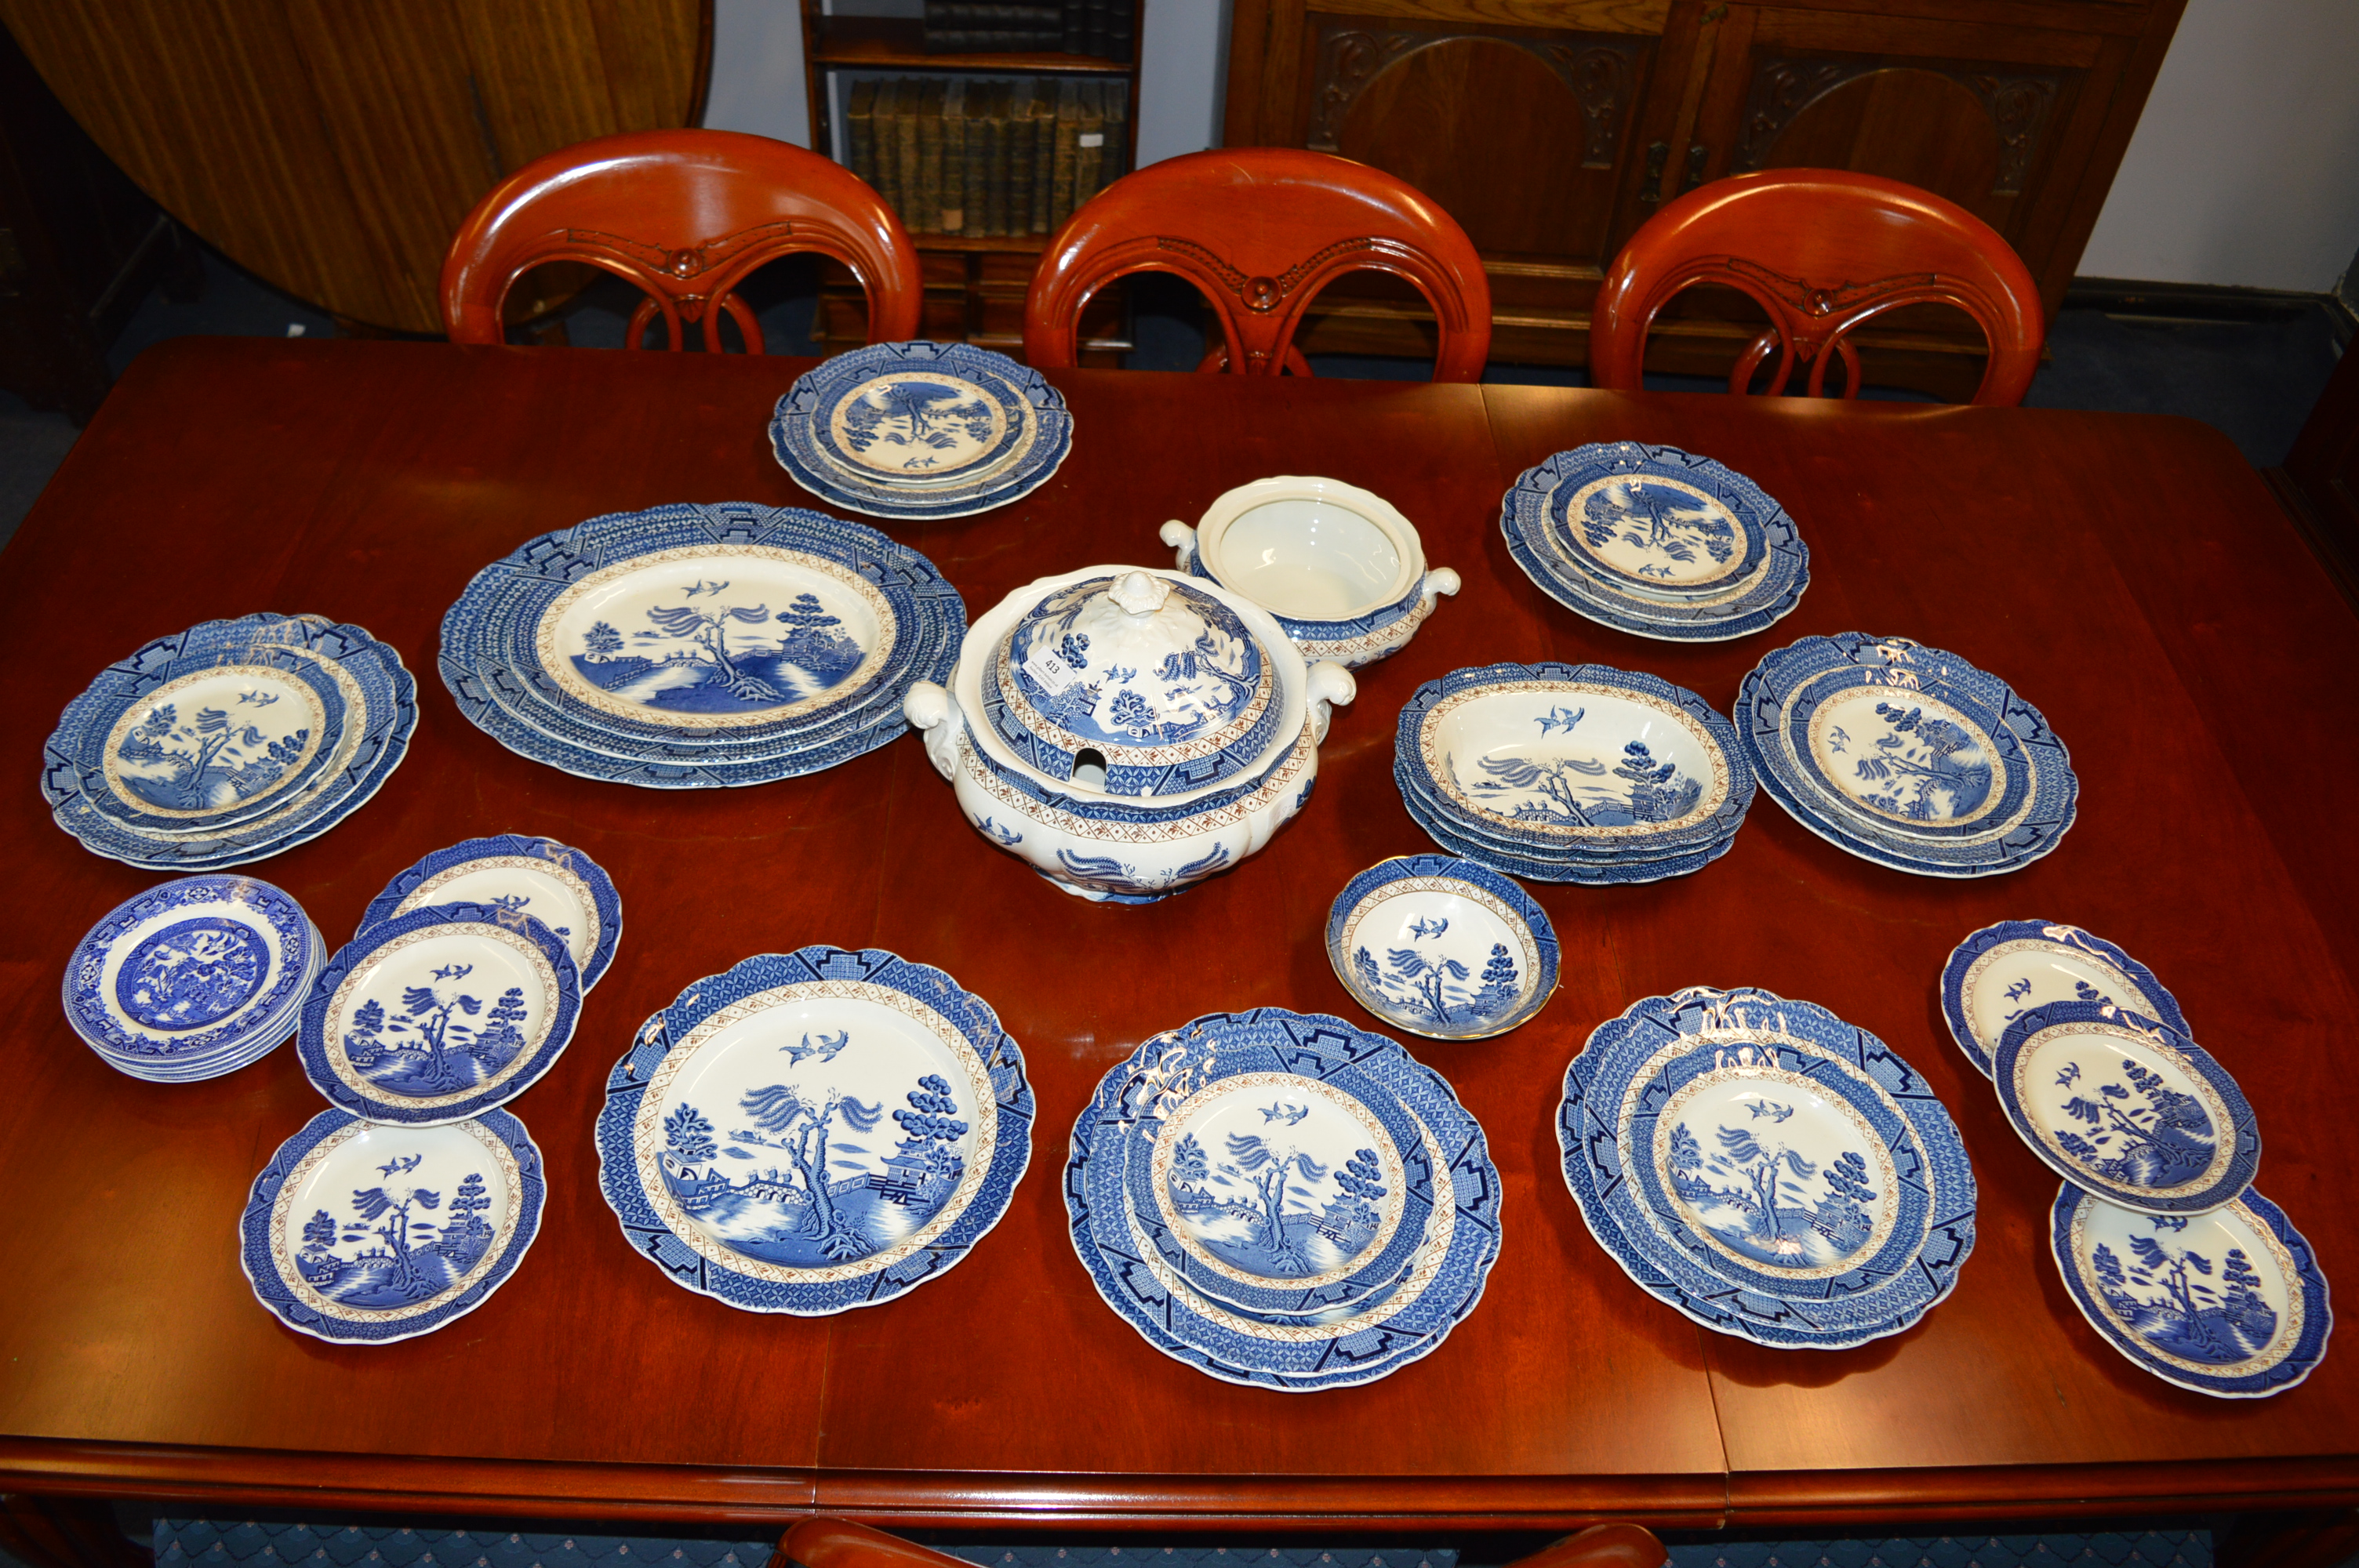 Booths Willow Pattern Part Dinner Service; Tureen, Dishes, Plates, etc. (35 Pieces)